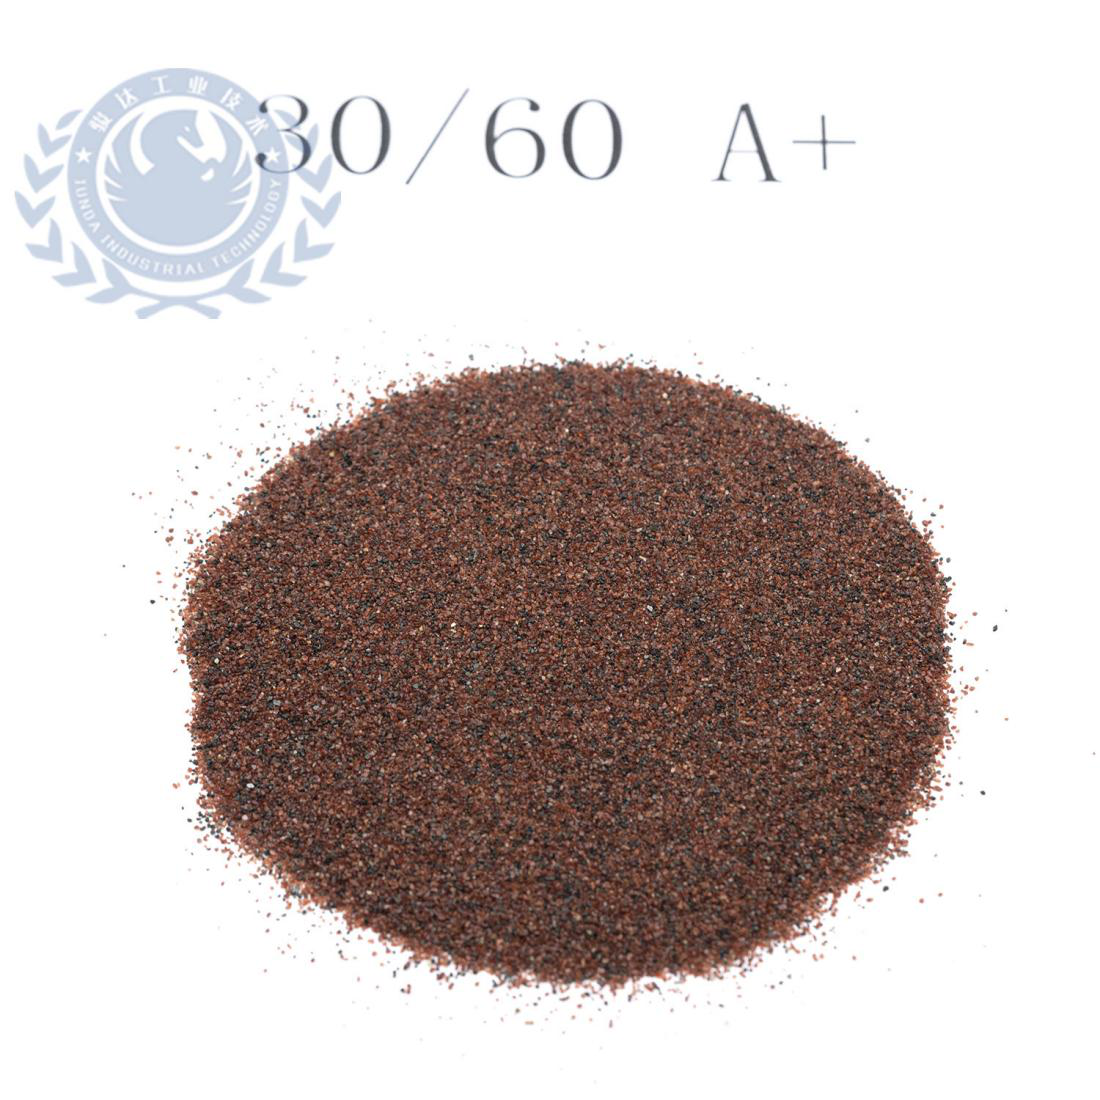 How to choose to distinguish the quality of garnet waterjet sand?